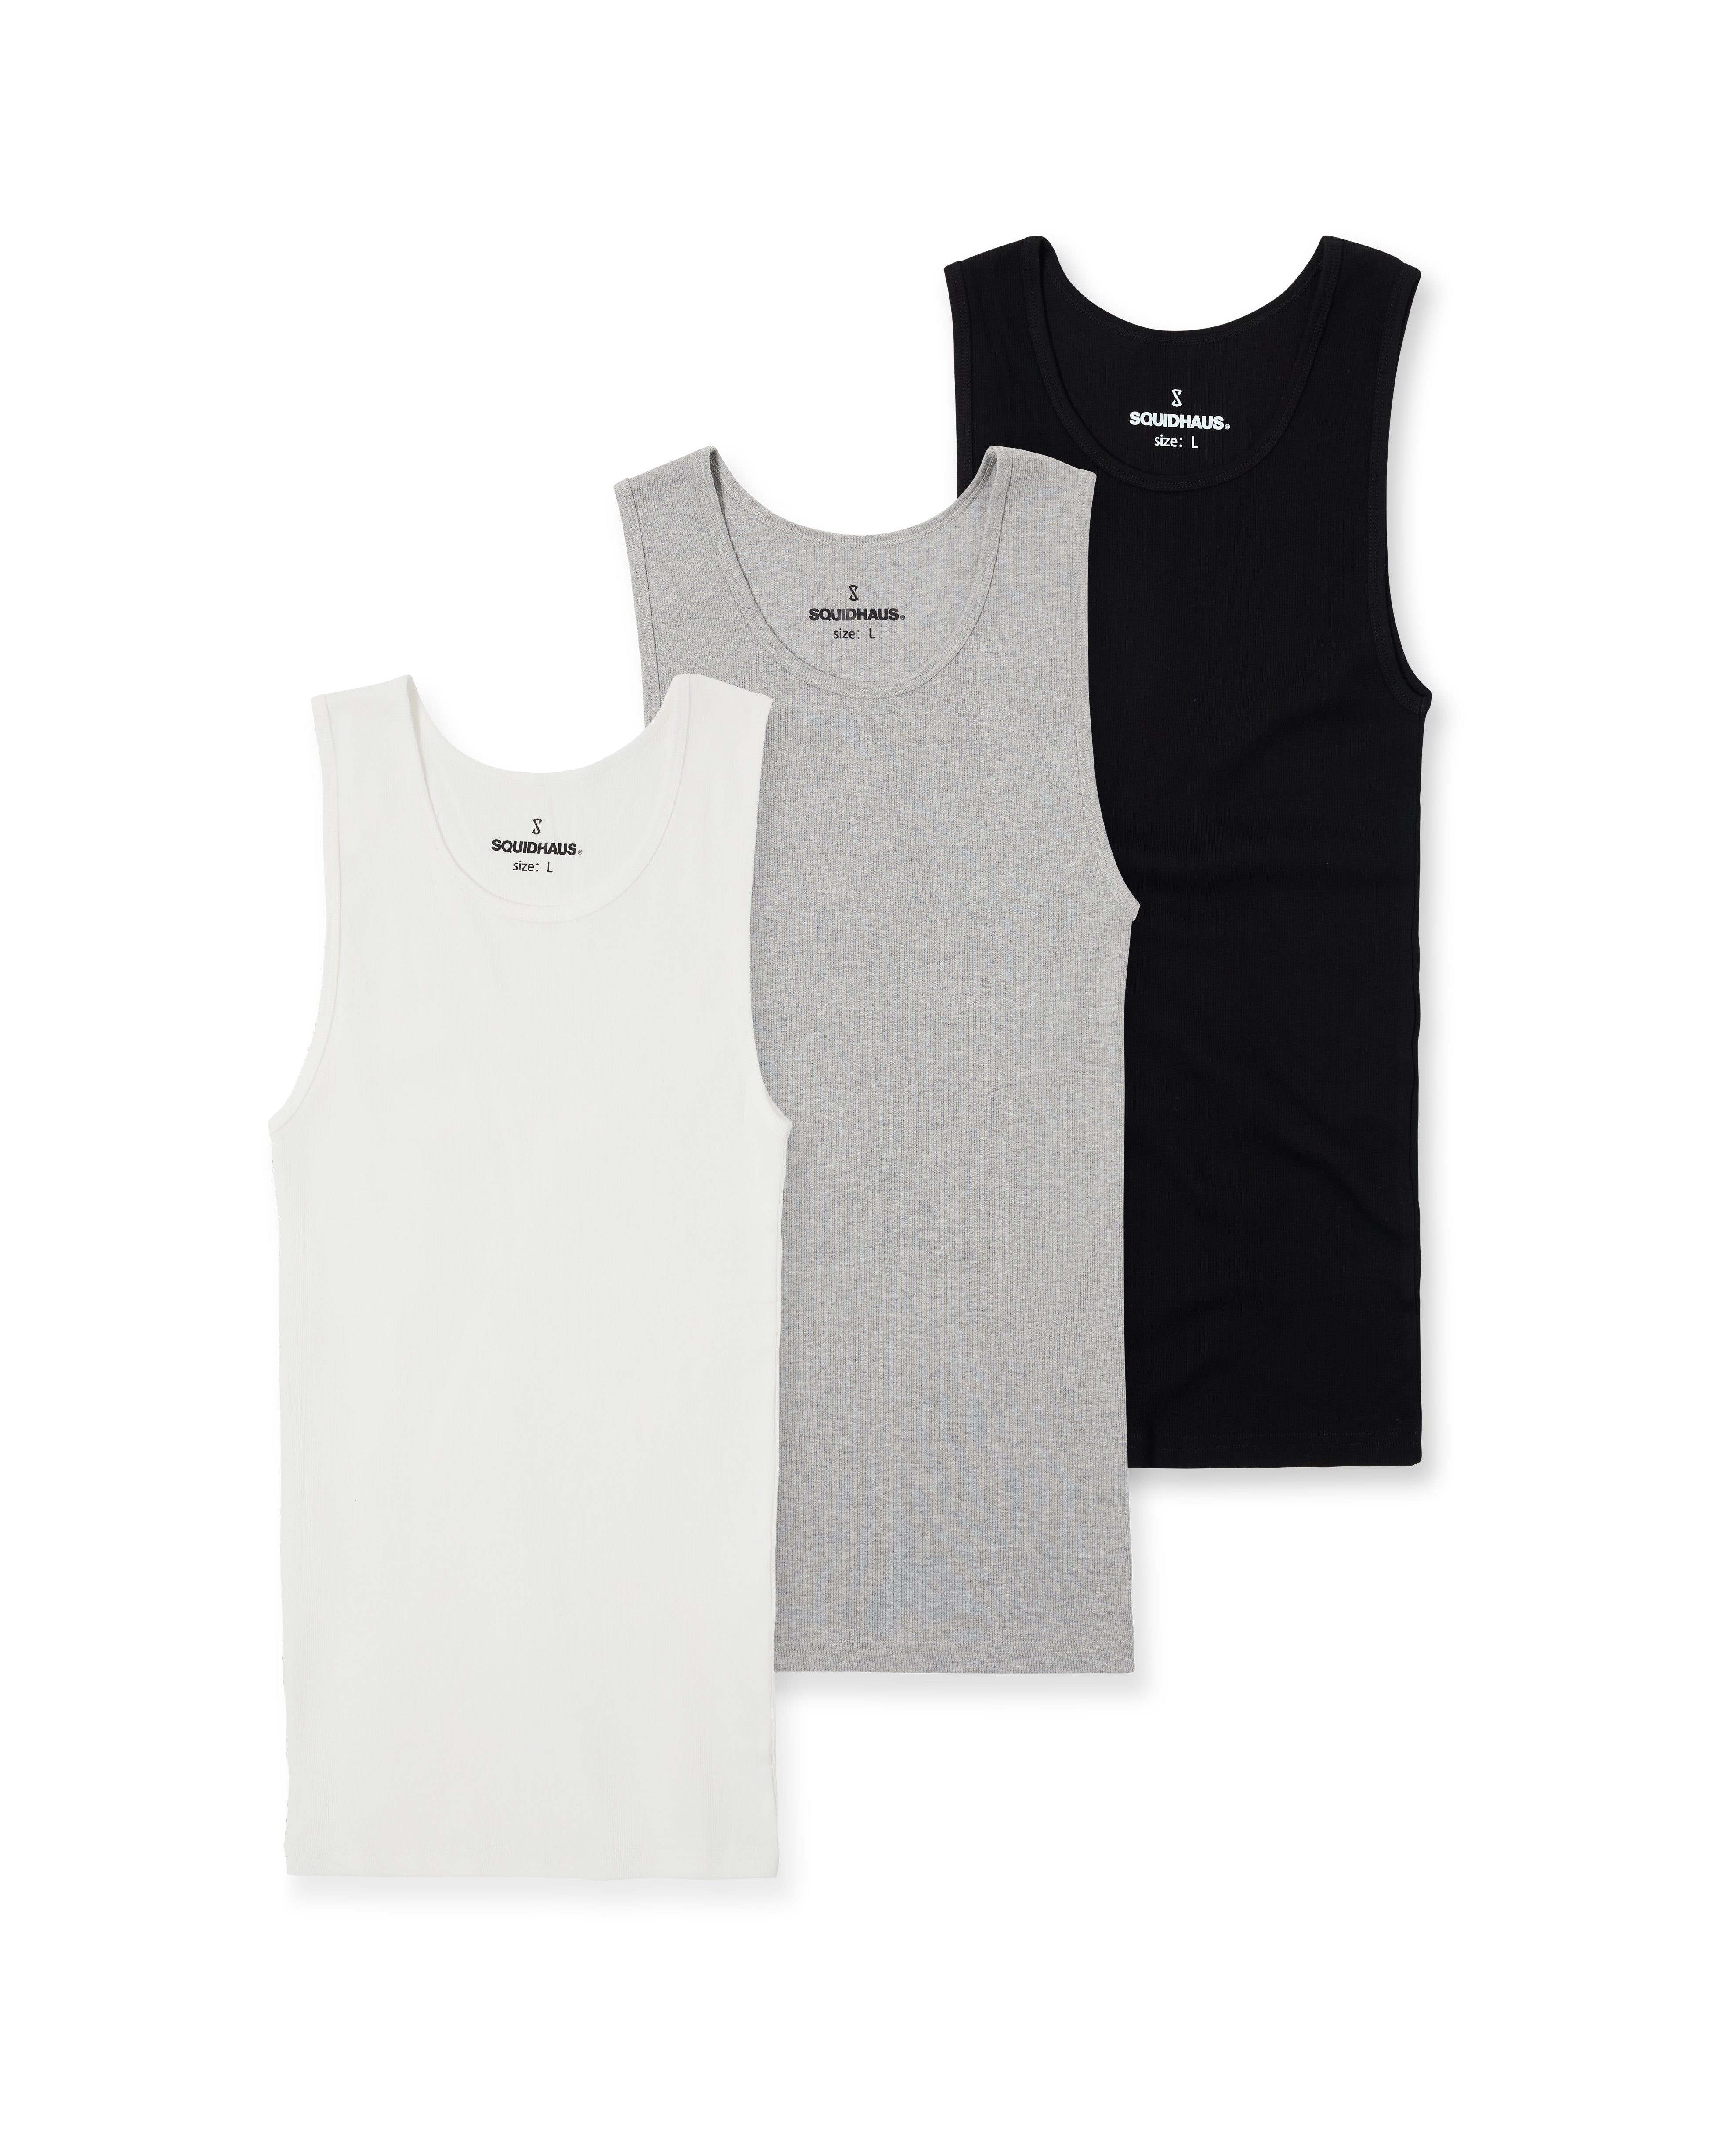 Premium Fitted Tank 3 Pack - Black/Grey/White